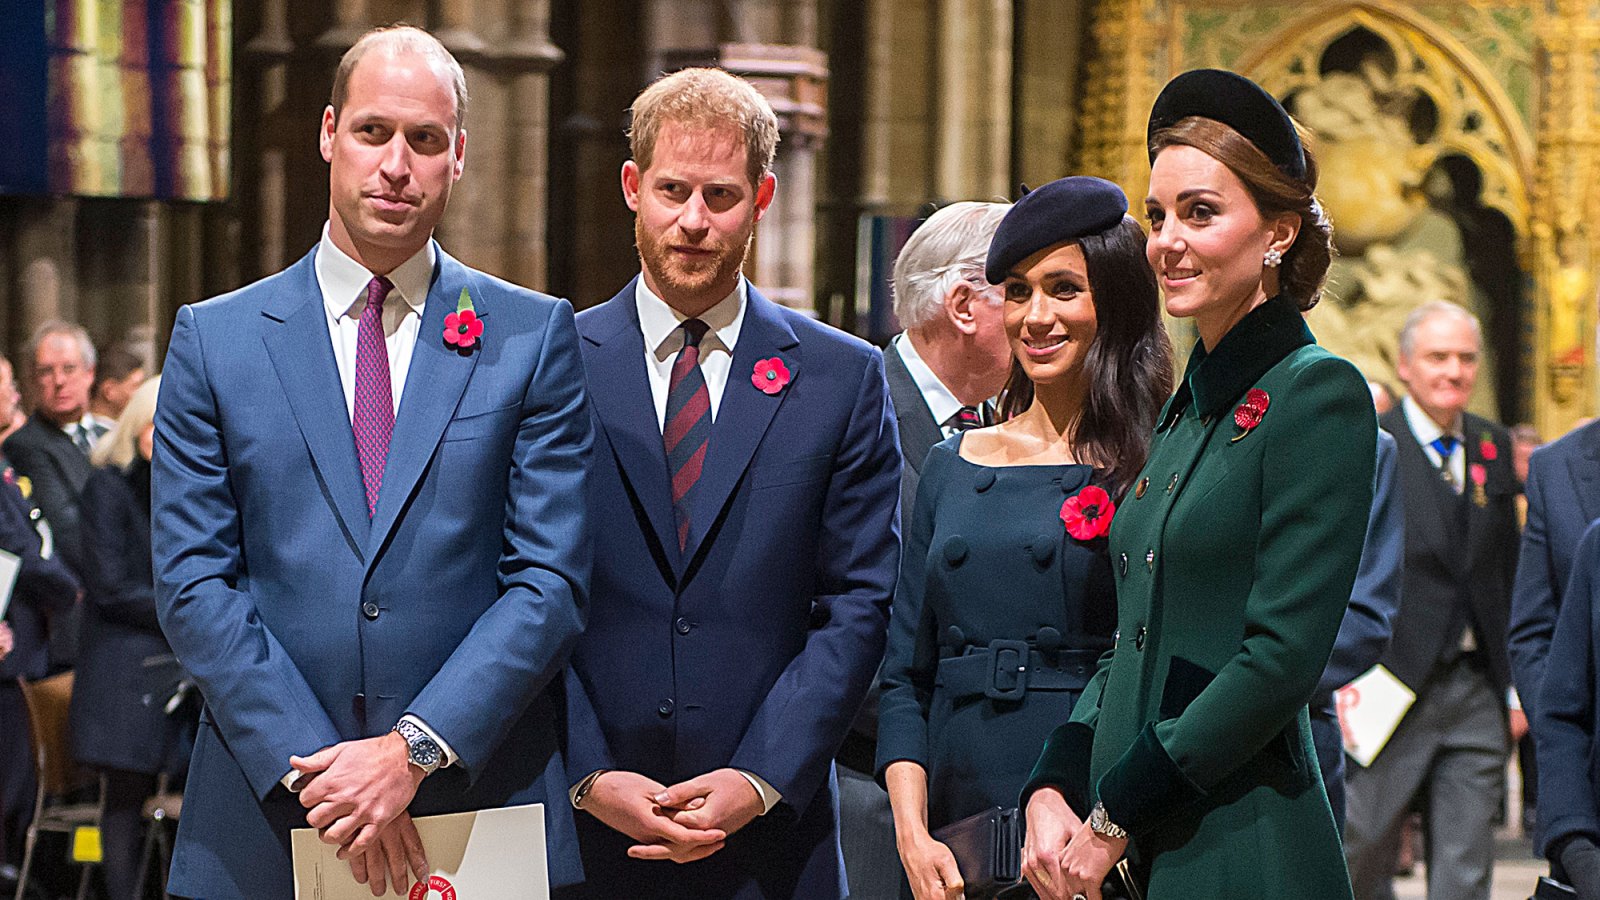 Prince William, Duchess Kate, Prince Harry and Duchess Meghan